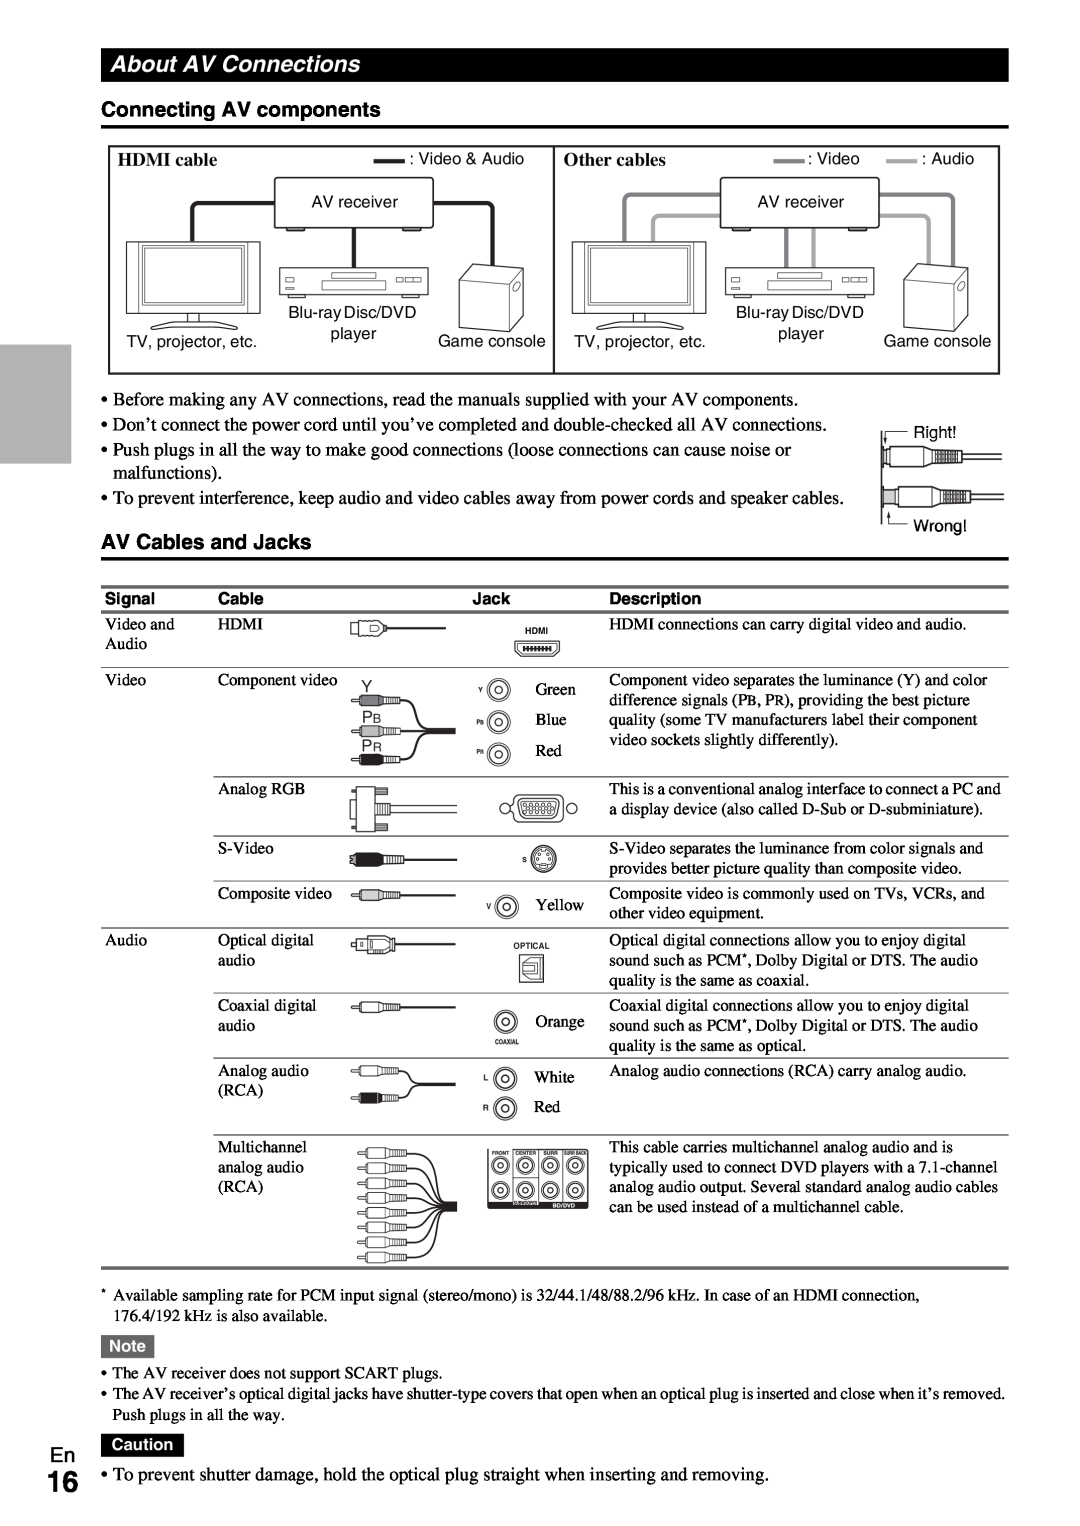 Onkyo HT-RC370 instruction manual About AV Connections, Connecting AV components, AV Cables and Jacks 